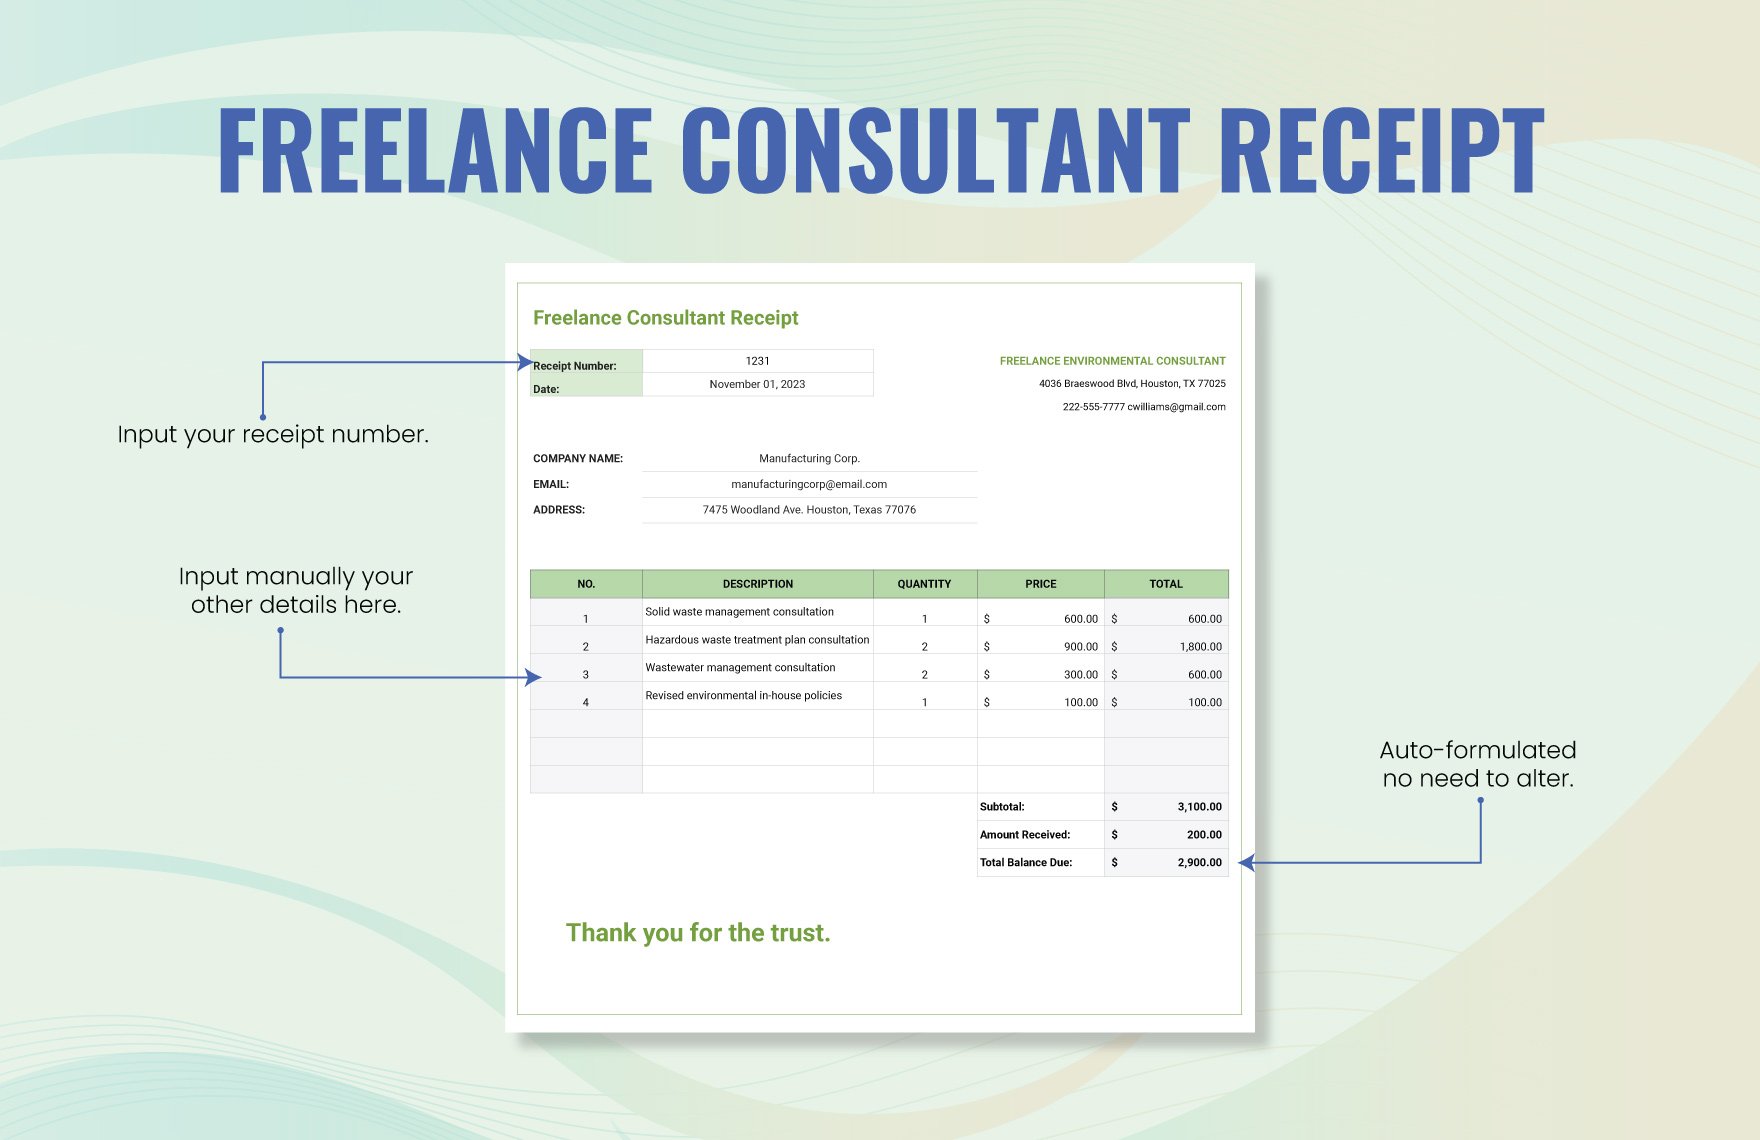 Freelance Consultant Receipt Template in Google Docs, Word, Apple ...